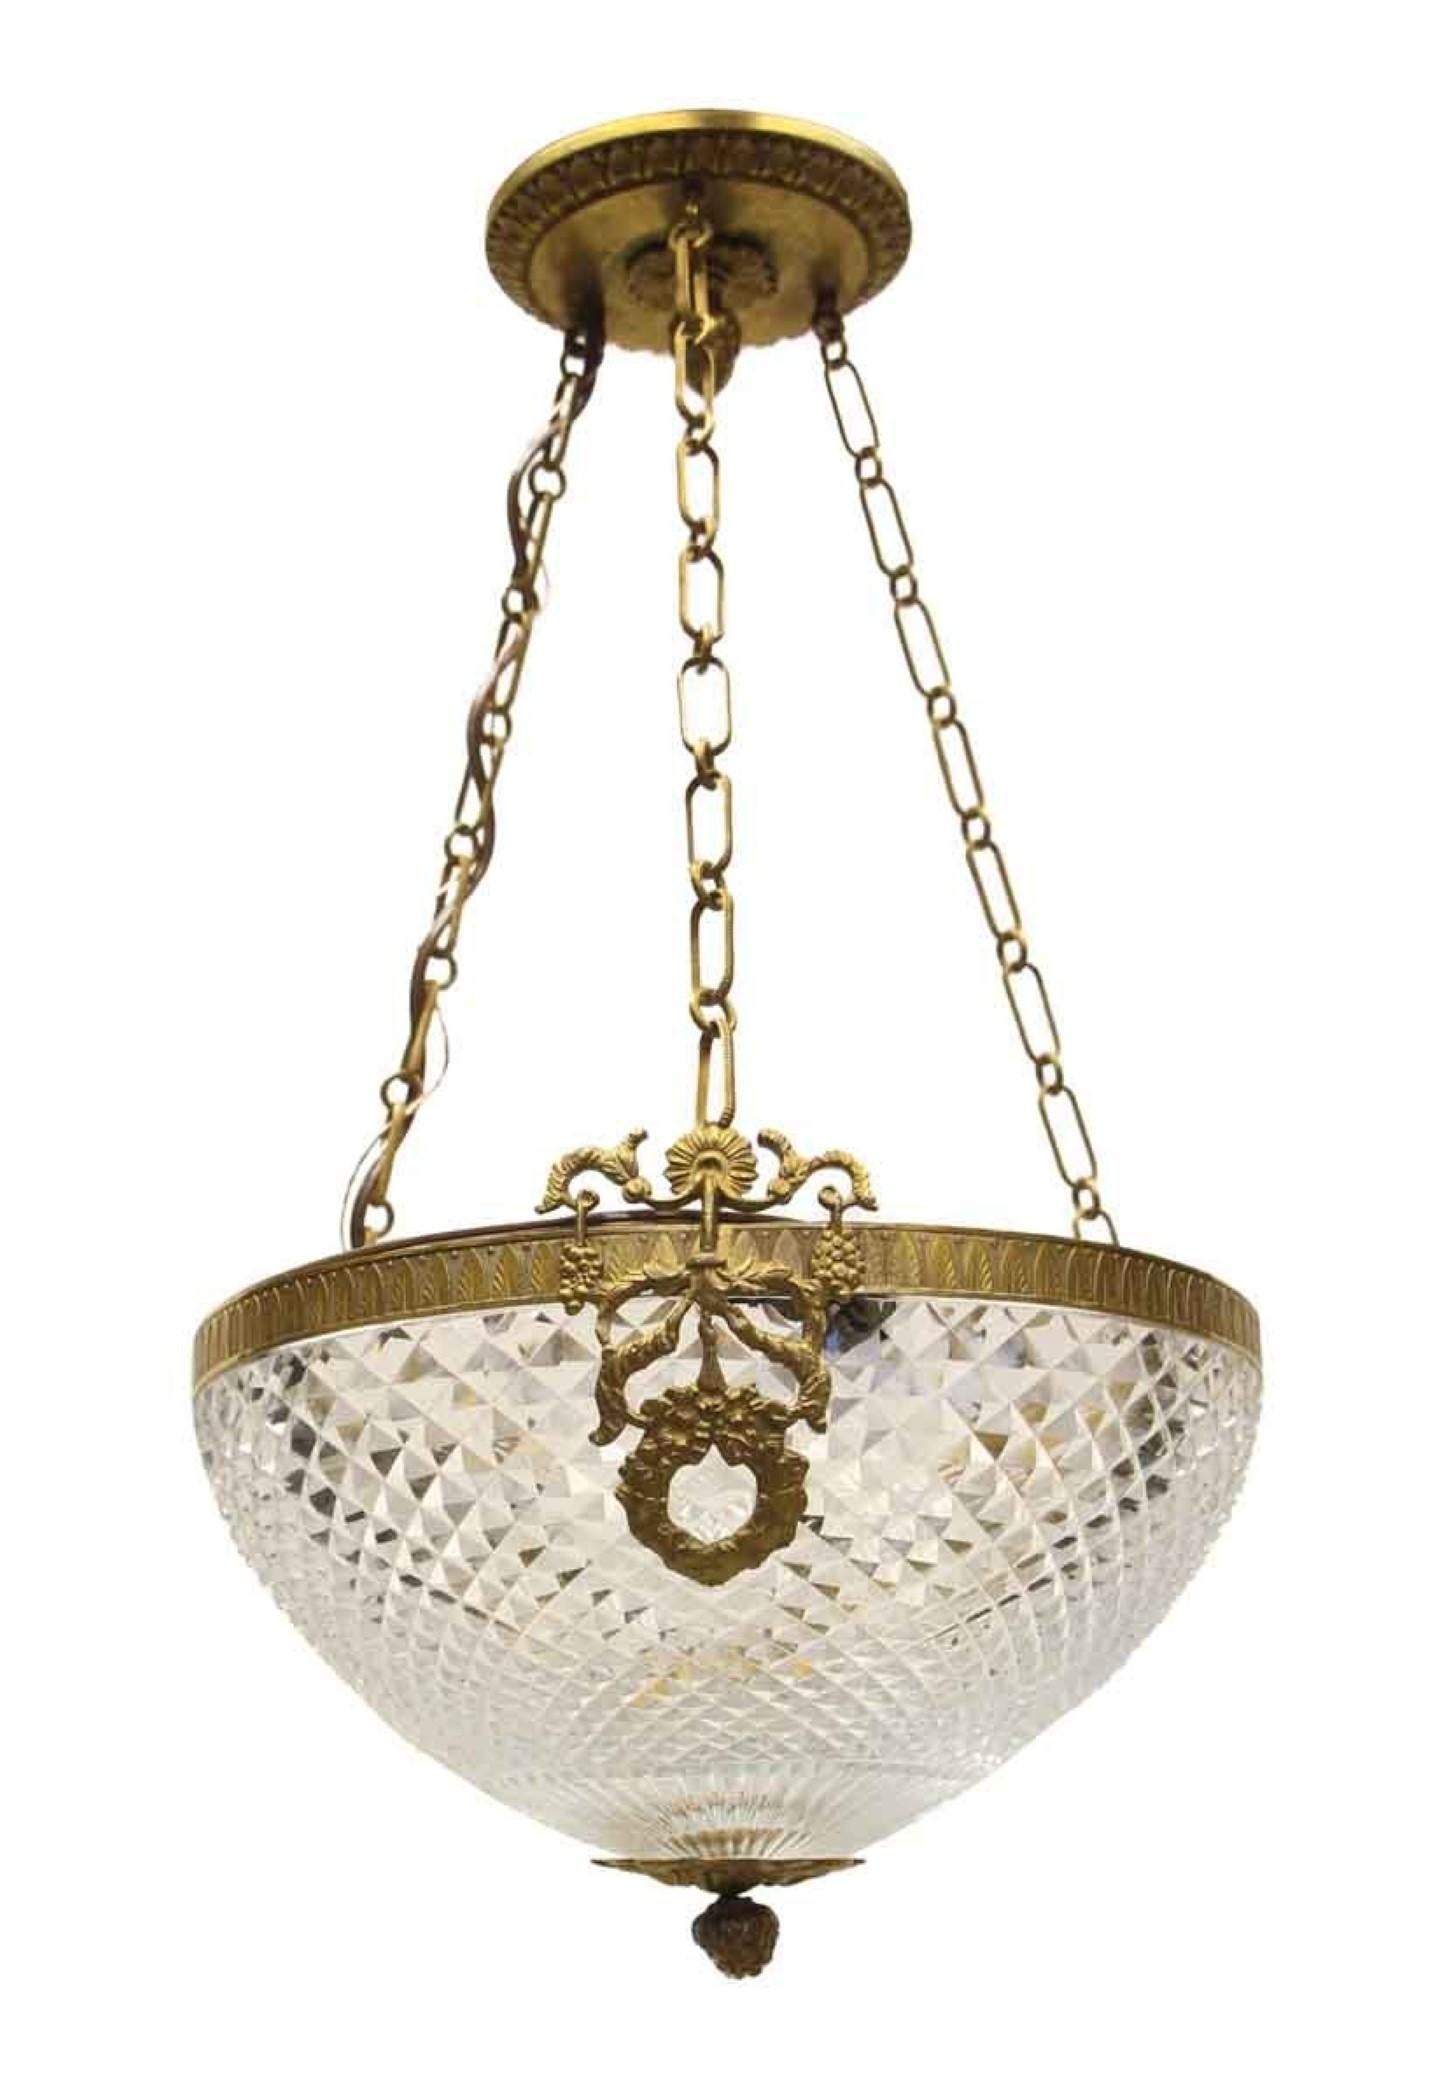 1920s gold gilt brass and clear cut crystal dish pendant light with decorative wreath and bow detail. Three candelabra sockets are inside the bowl. This was retrieved from the 36th floor of the Waldorf Astoria towers. It has been fully restored.